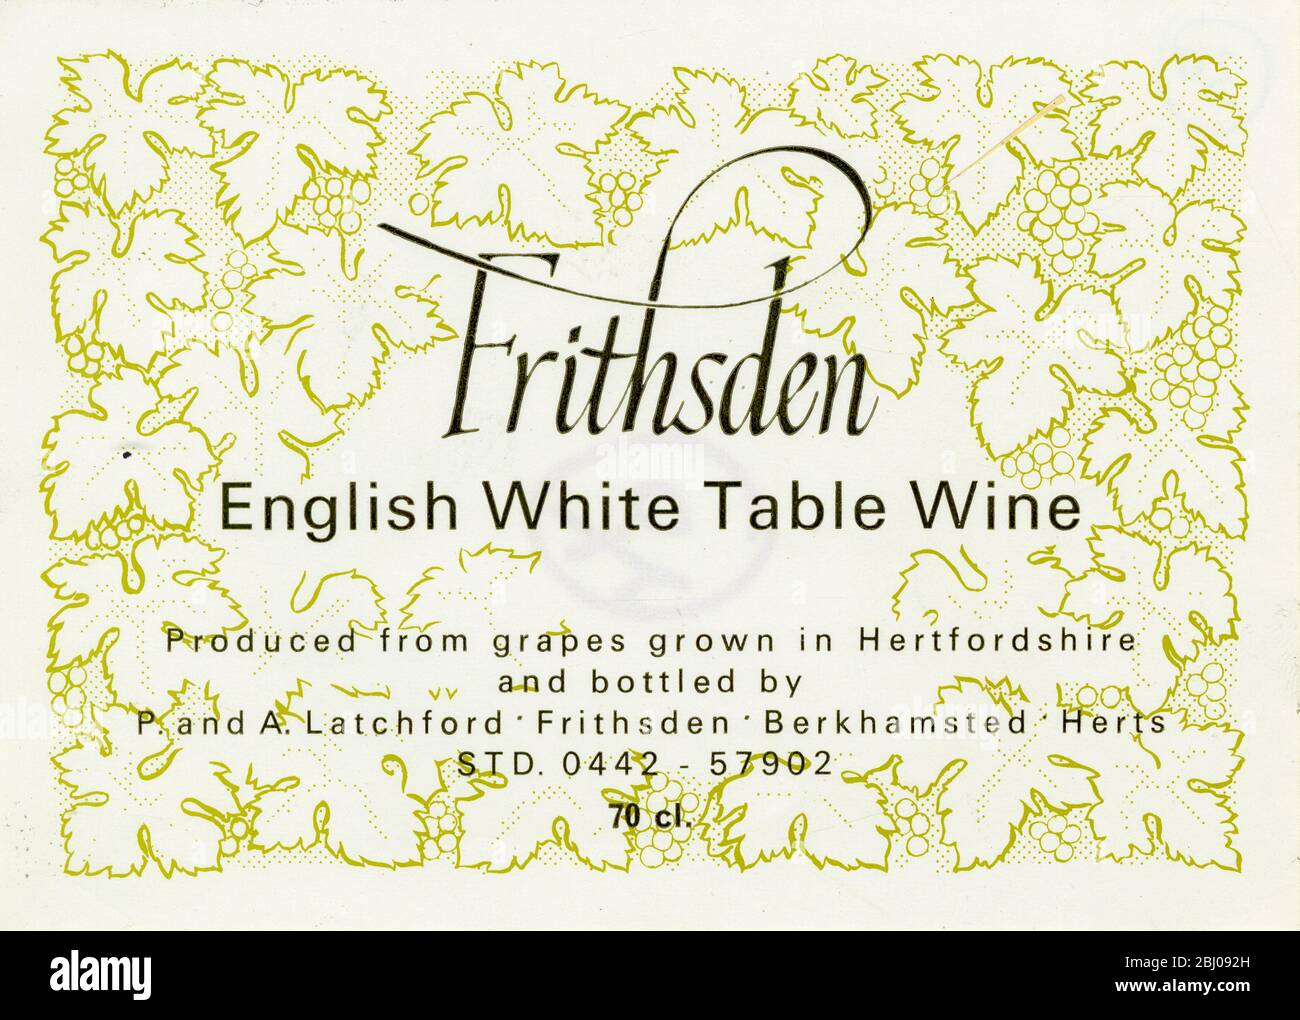 Wine label - Frithsden English White Table Wine. Produced in Hertfordshire and bottled by P & A Latchford in Frithsden, Berkhamsted, Hertfordshire. - 1977 Stock Photo